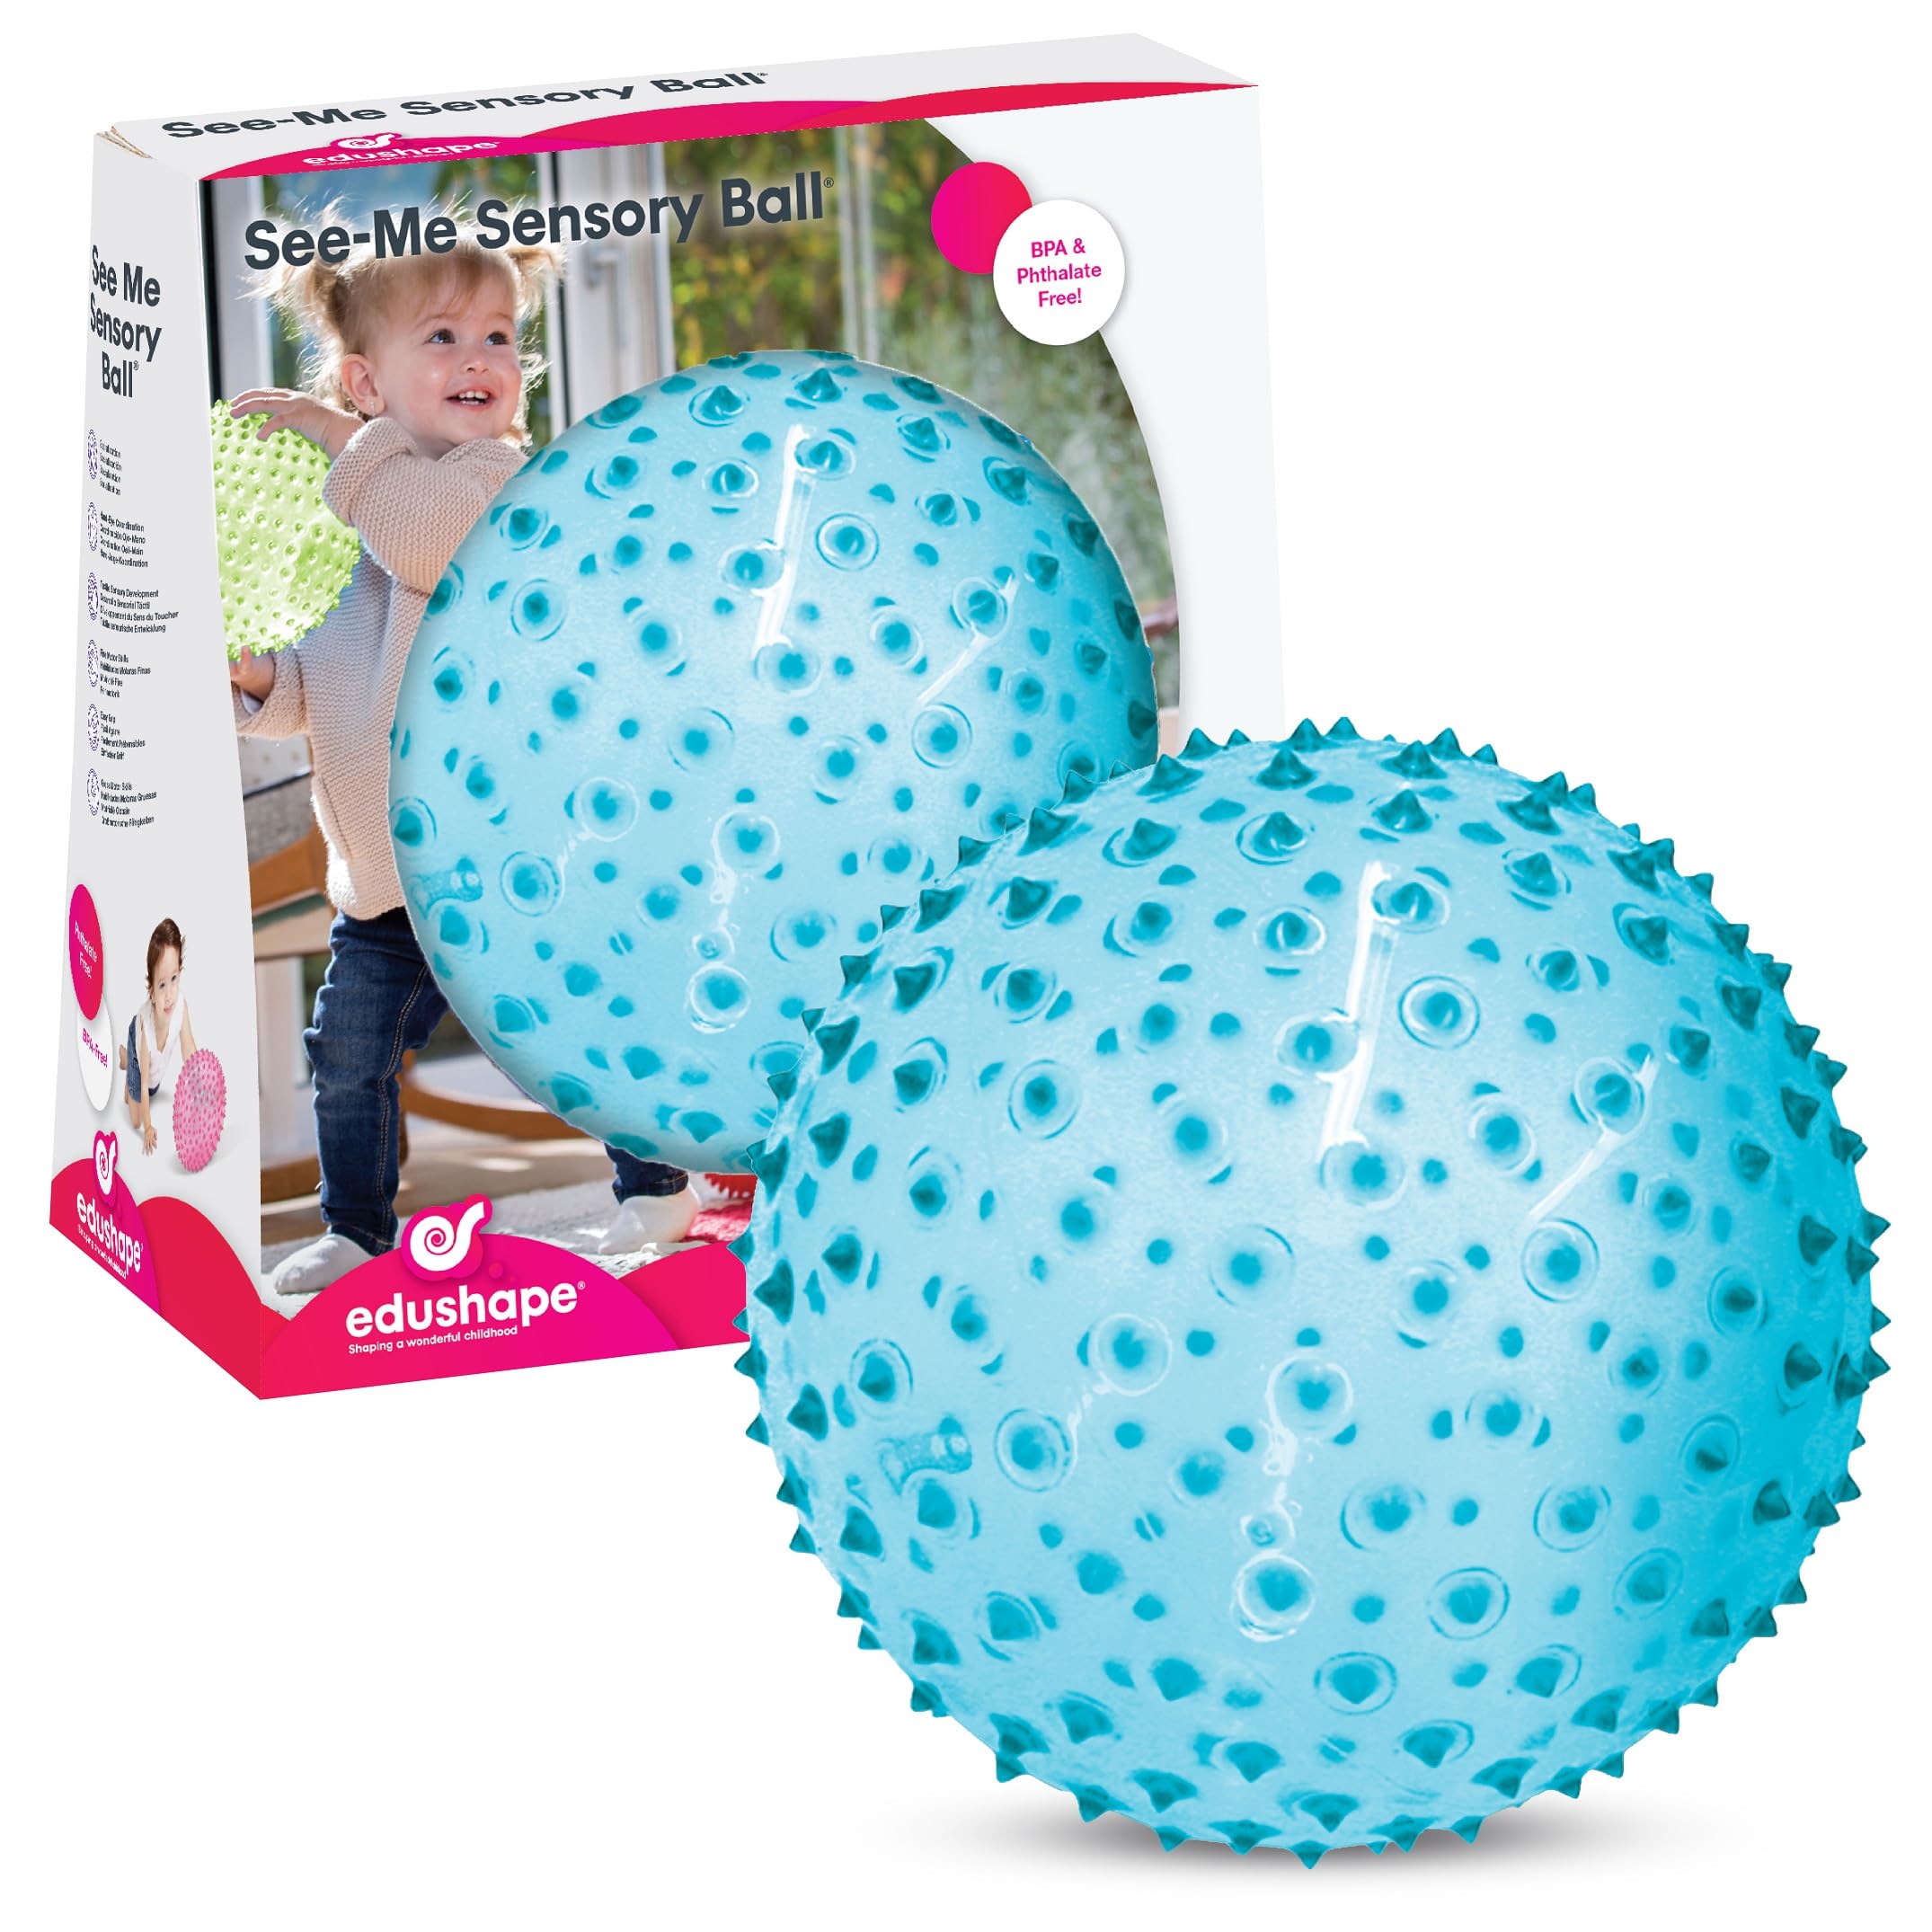 Edushape The Original Sensory Ball for Baby - 7” Transparent Trendy Color Baby Ball That Helps Enhance Gross Motor Skills for Kids Aged 6 Months & Up - Pack of 1 Vibrant & Unique Toddler Ball for Baby